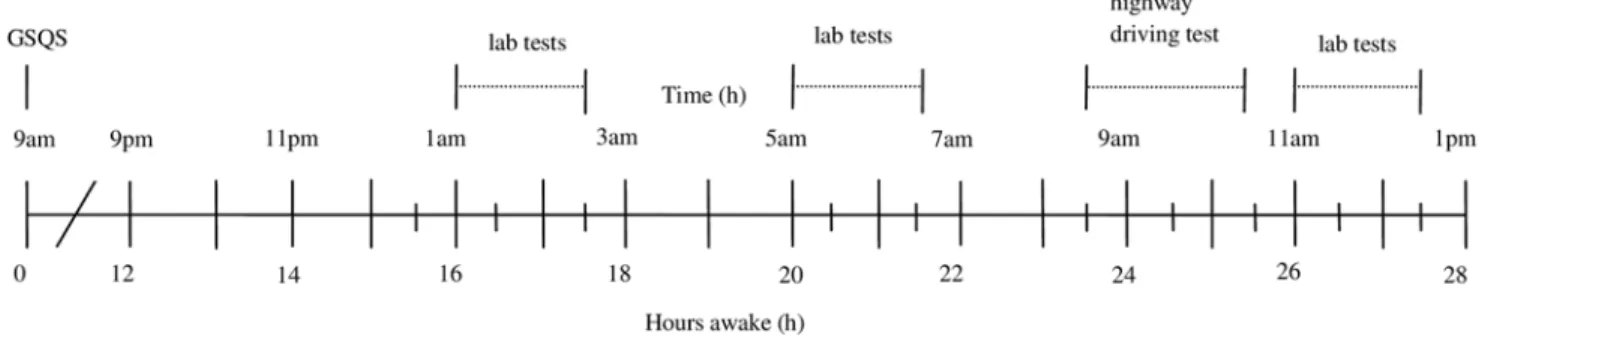 Fig 1. Timeline of the sleep deprivation condition. Abbreviation: GSQS = Groningen Sleep Quality Scale.